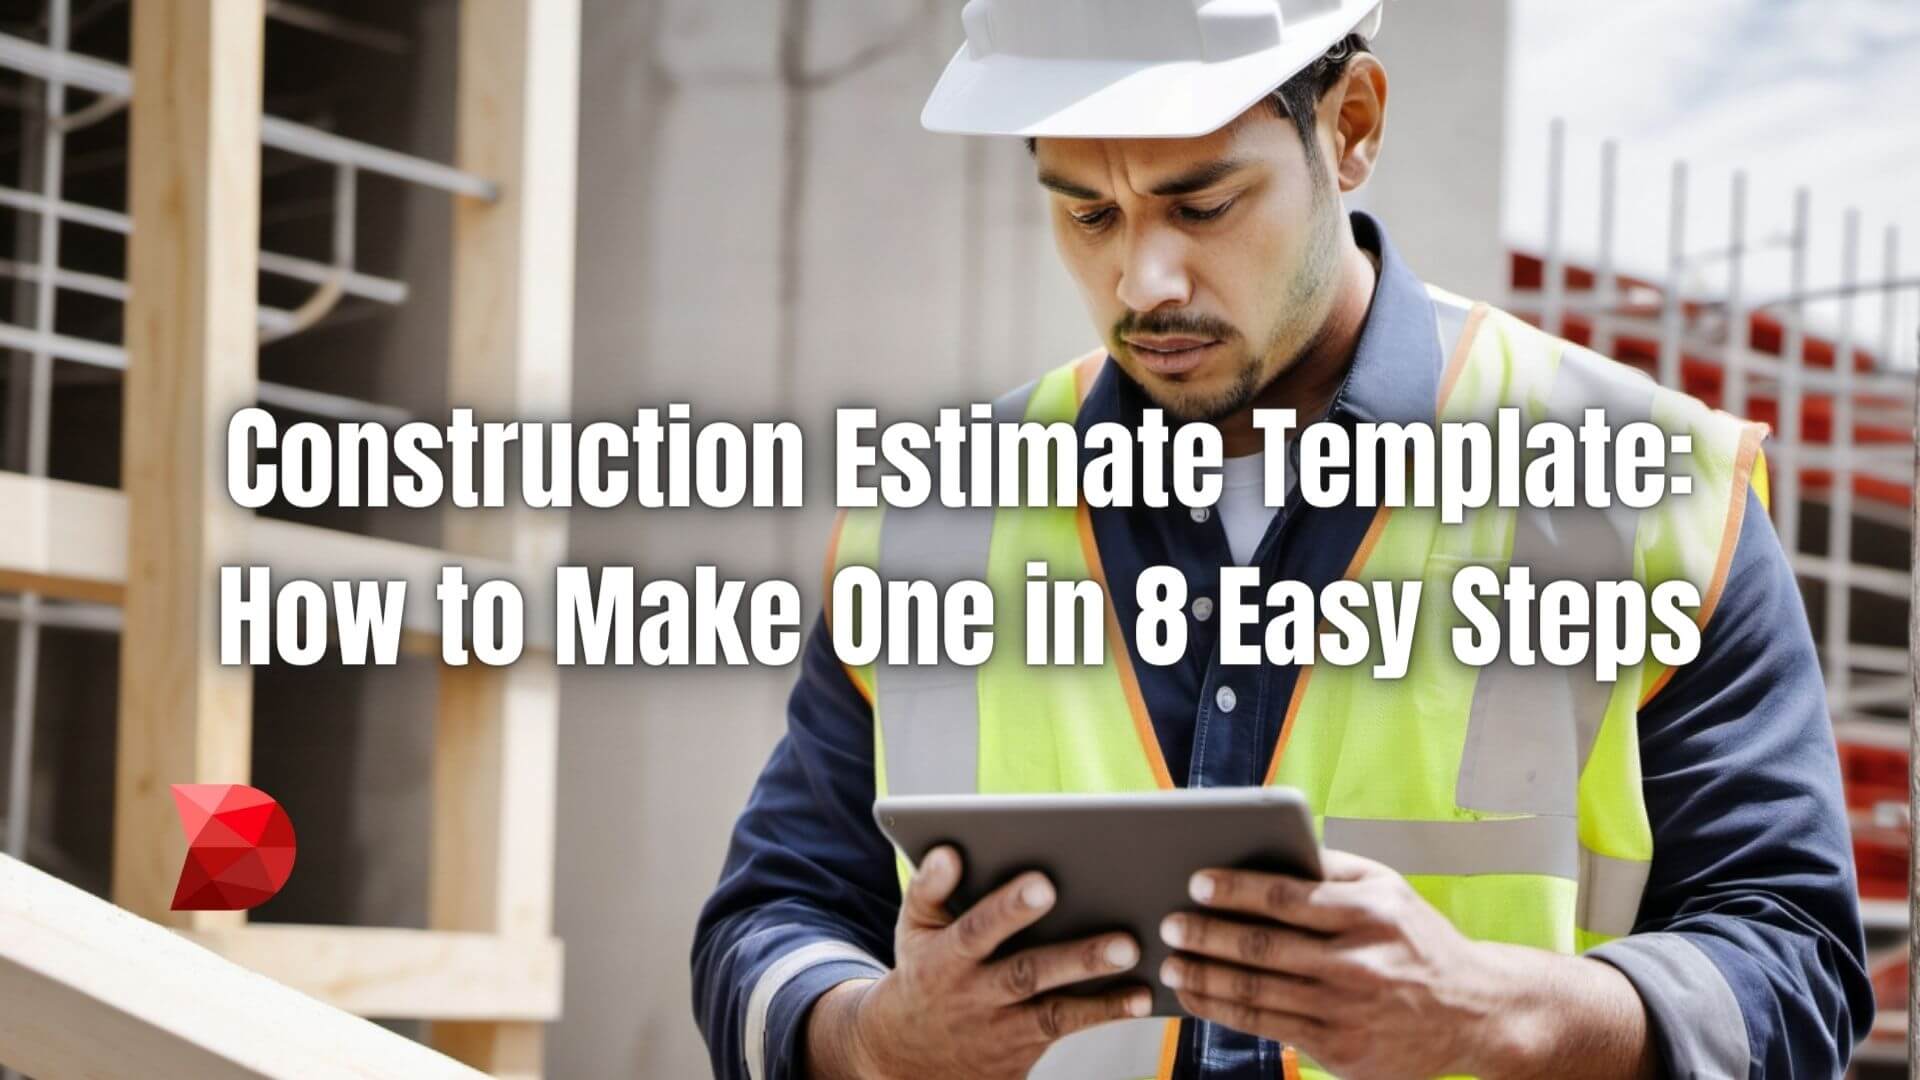 Craft accurate construction estimates effortlessly! Click here to learn the 8 simple steps to create a precise estimate template in no time.